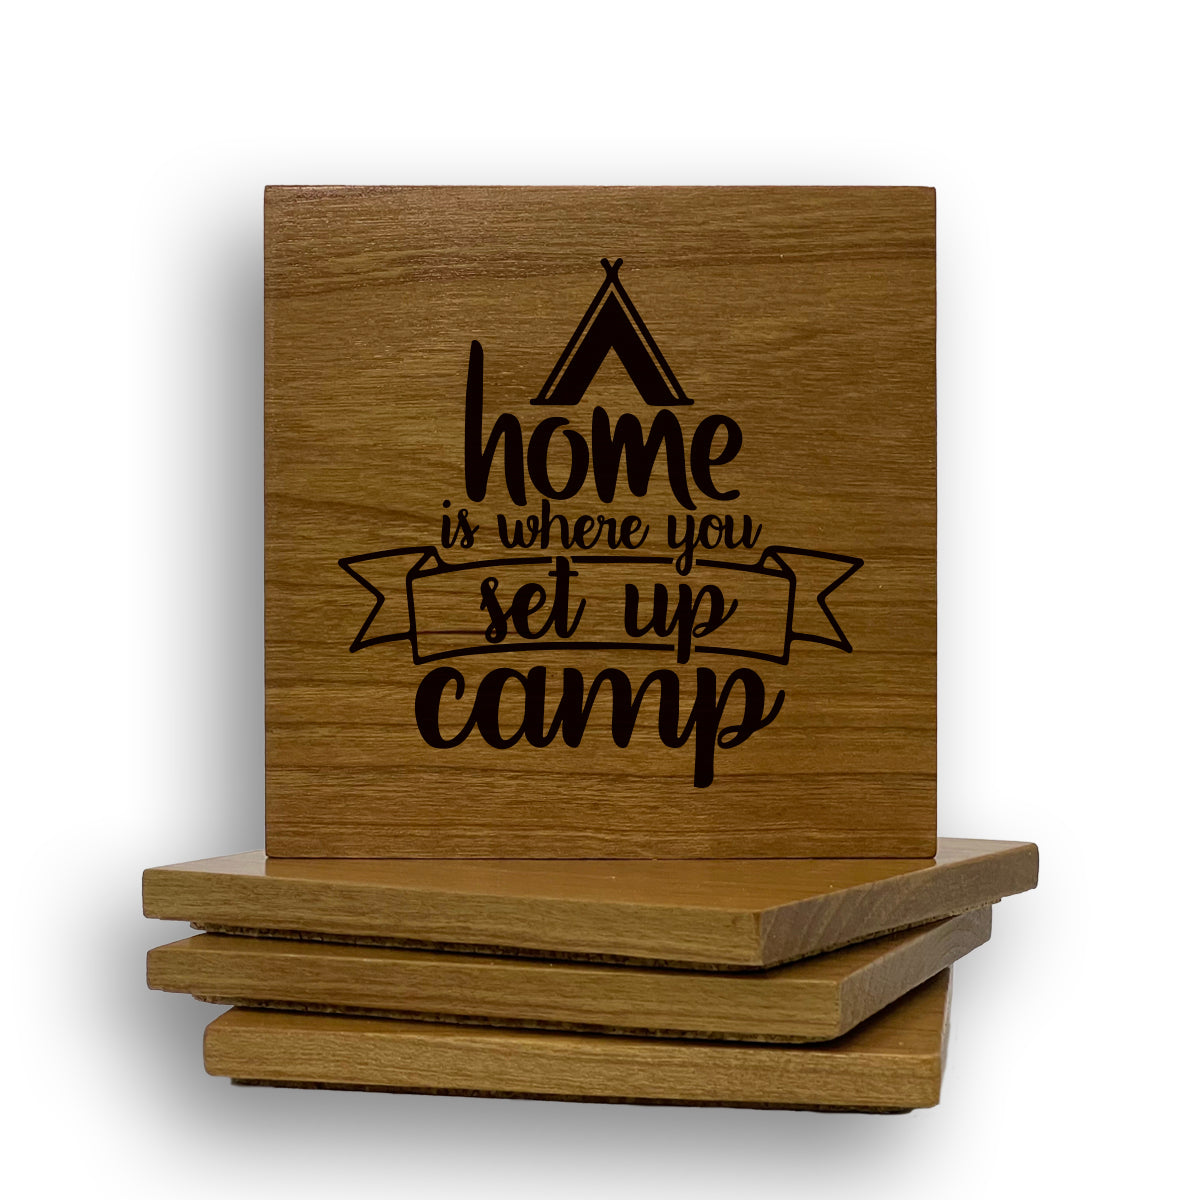 Home Is Where You Set Up Camp Coaster